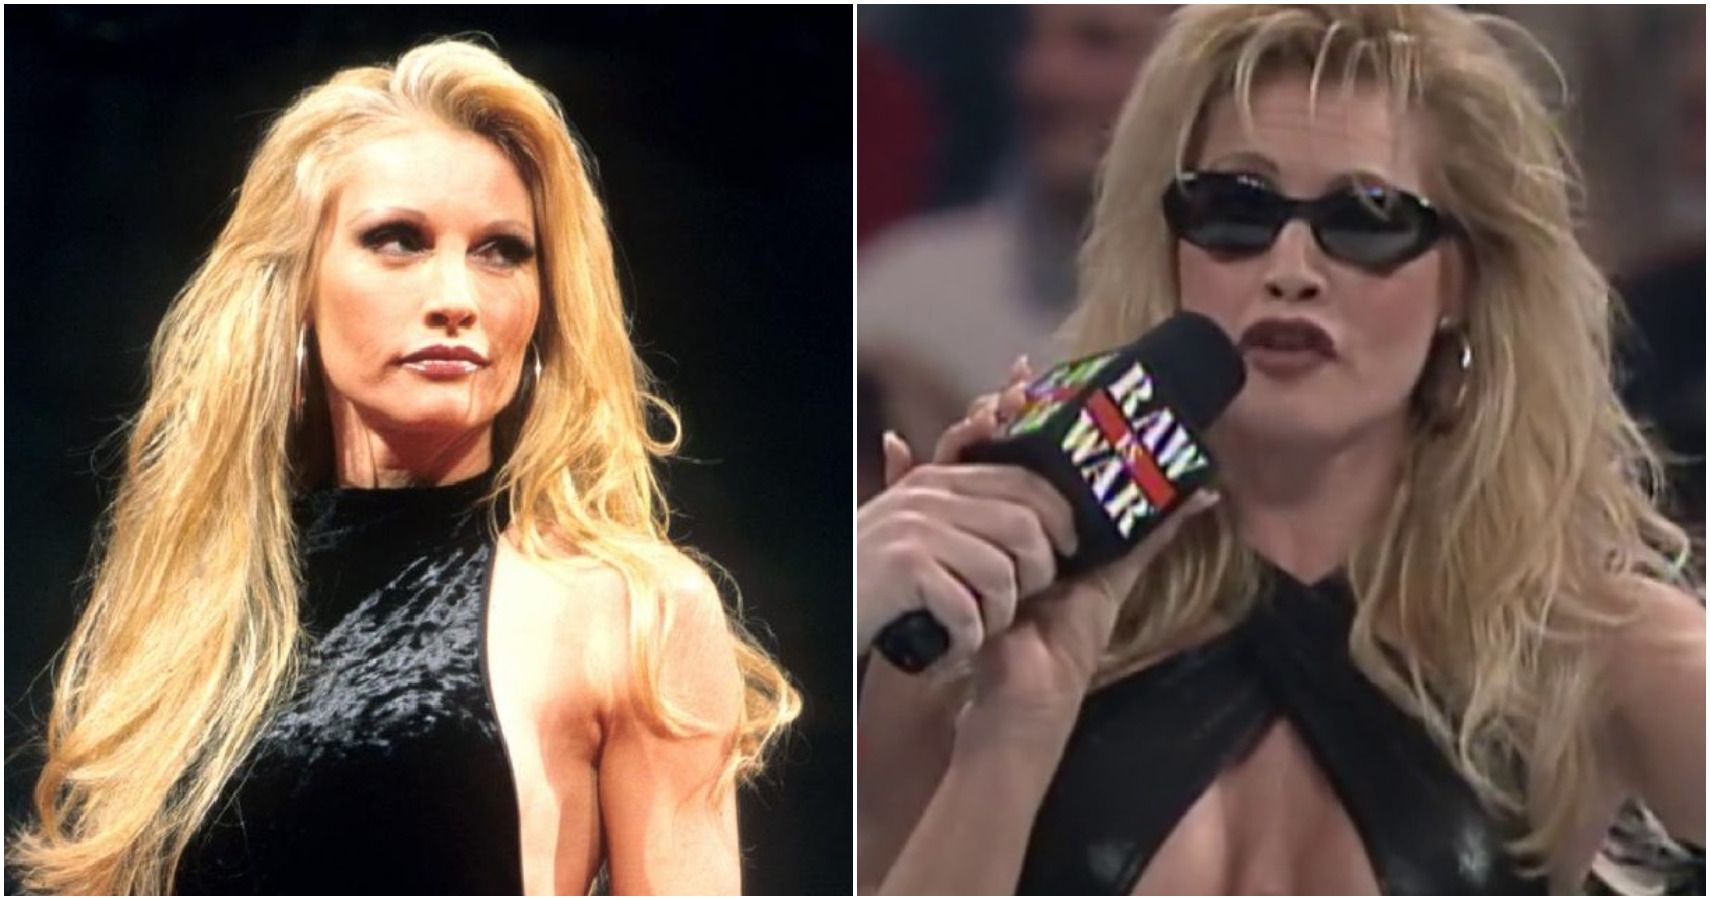 Sable is one of the biggest names from the Attitude Era